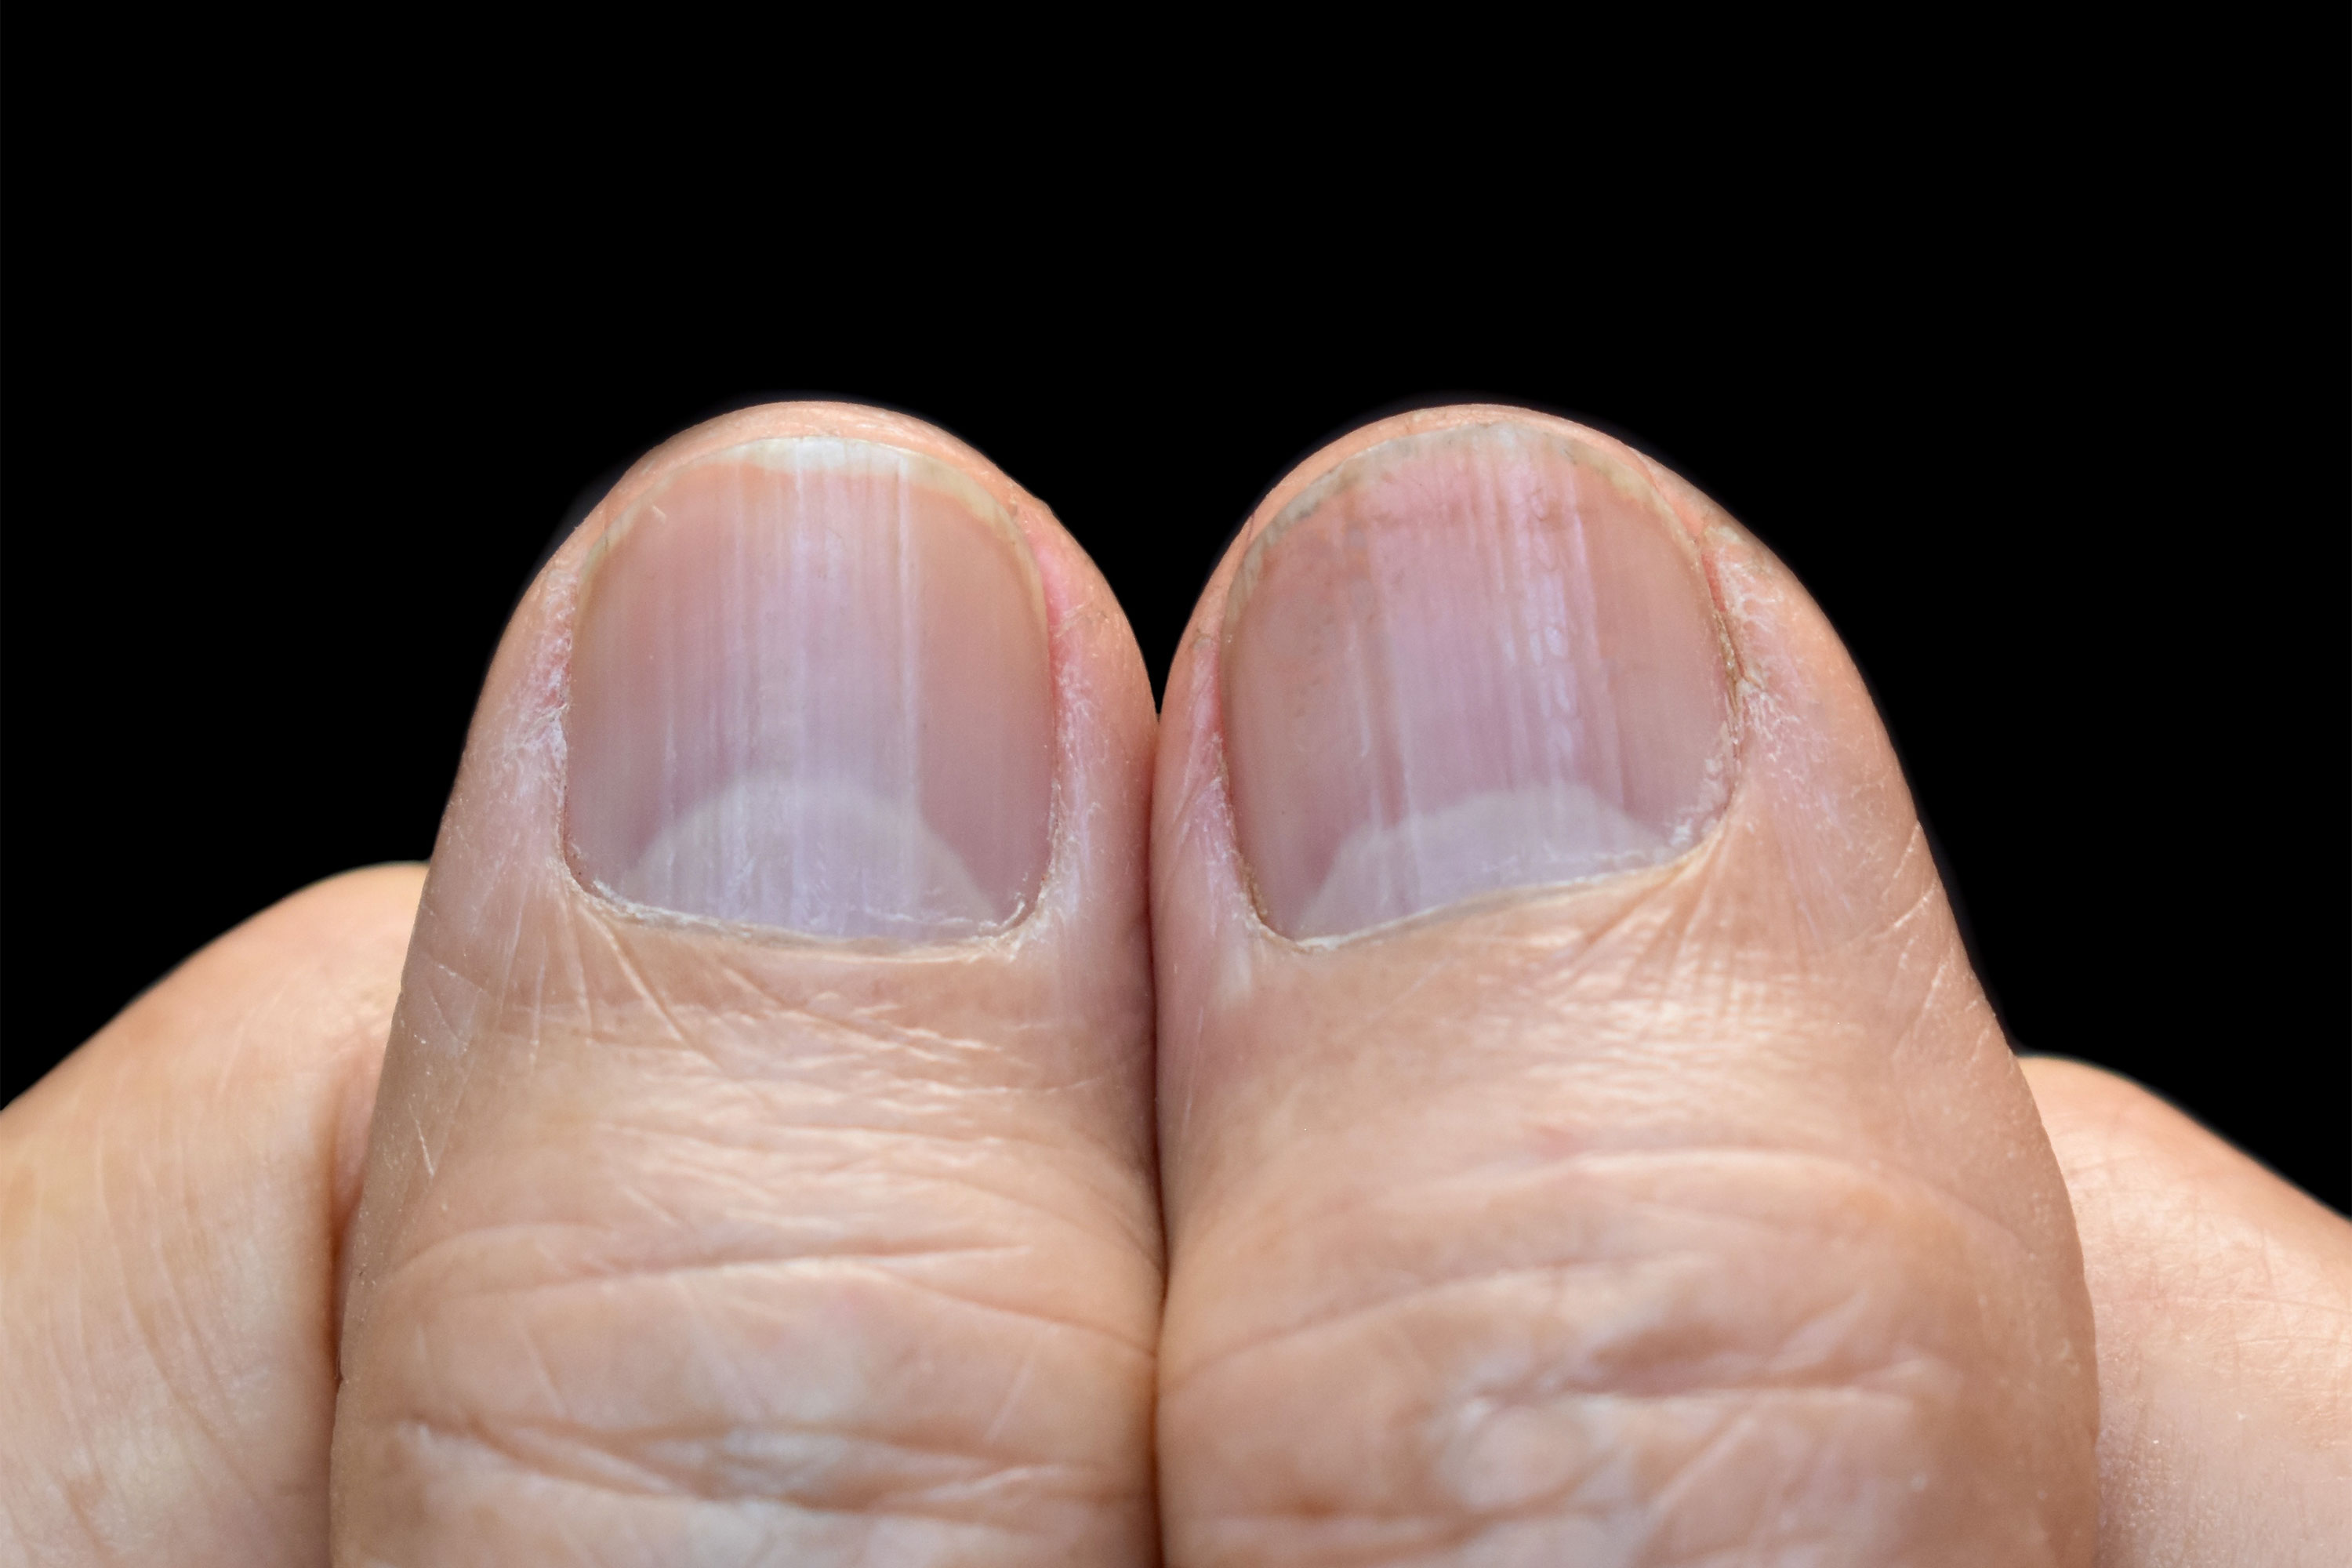 6 underlying nail health problems that may mean something more